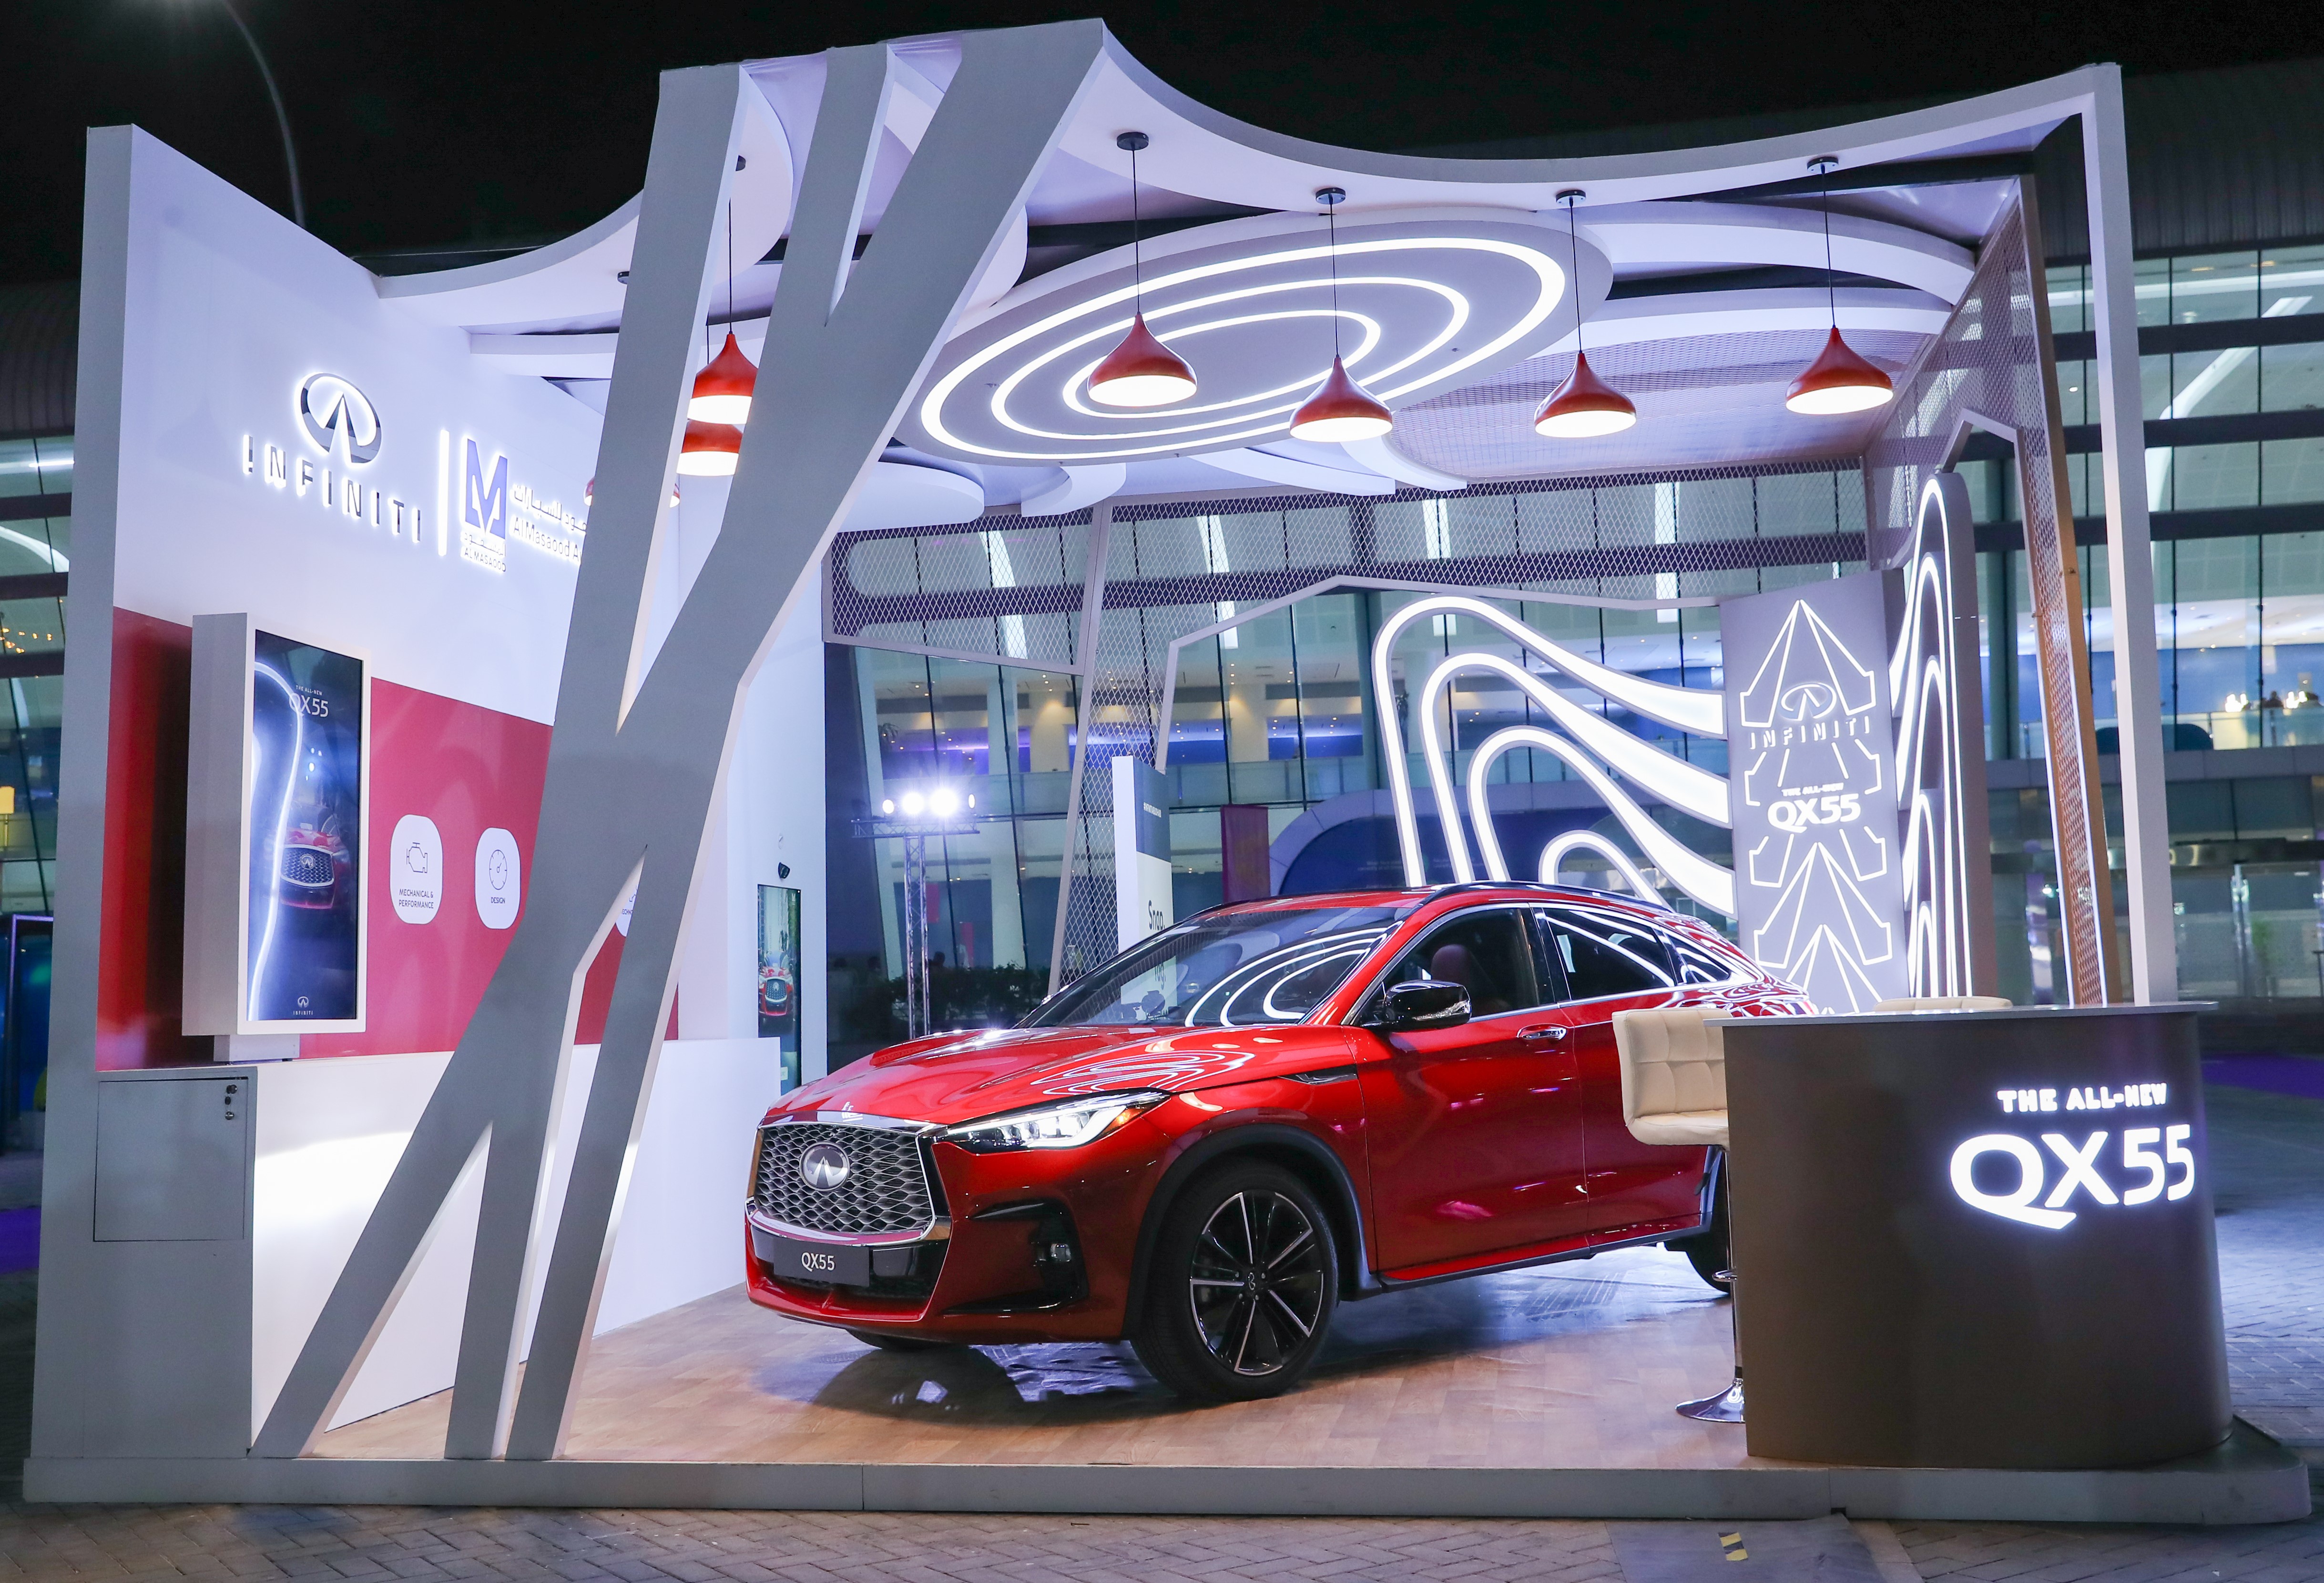 Taking center stage – The all-new INFINITI QX55 makes its official debut in Abu Dhabi